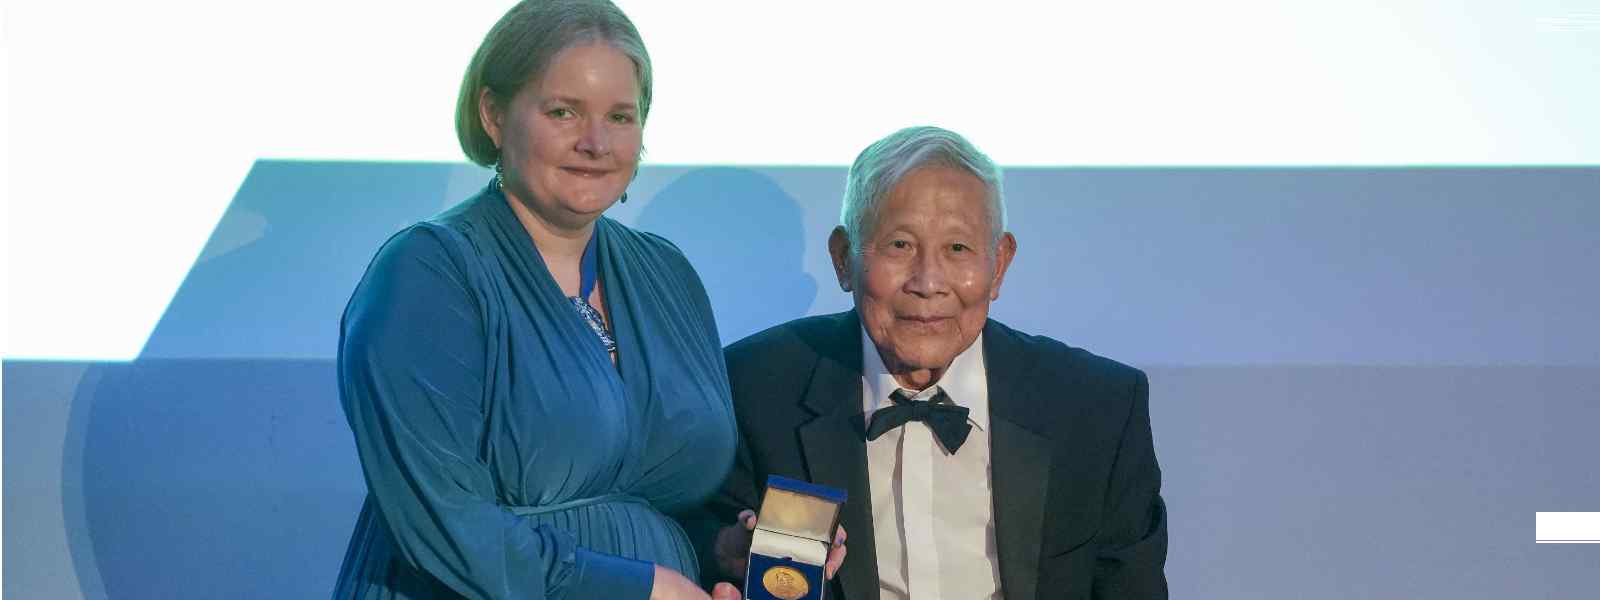 Professor Chengi Kuo receives the William Froude Medal from Honorary Professor Catriona Savage, President of the Royal Institute of Naval Architects. Photo courtesy of RINA 